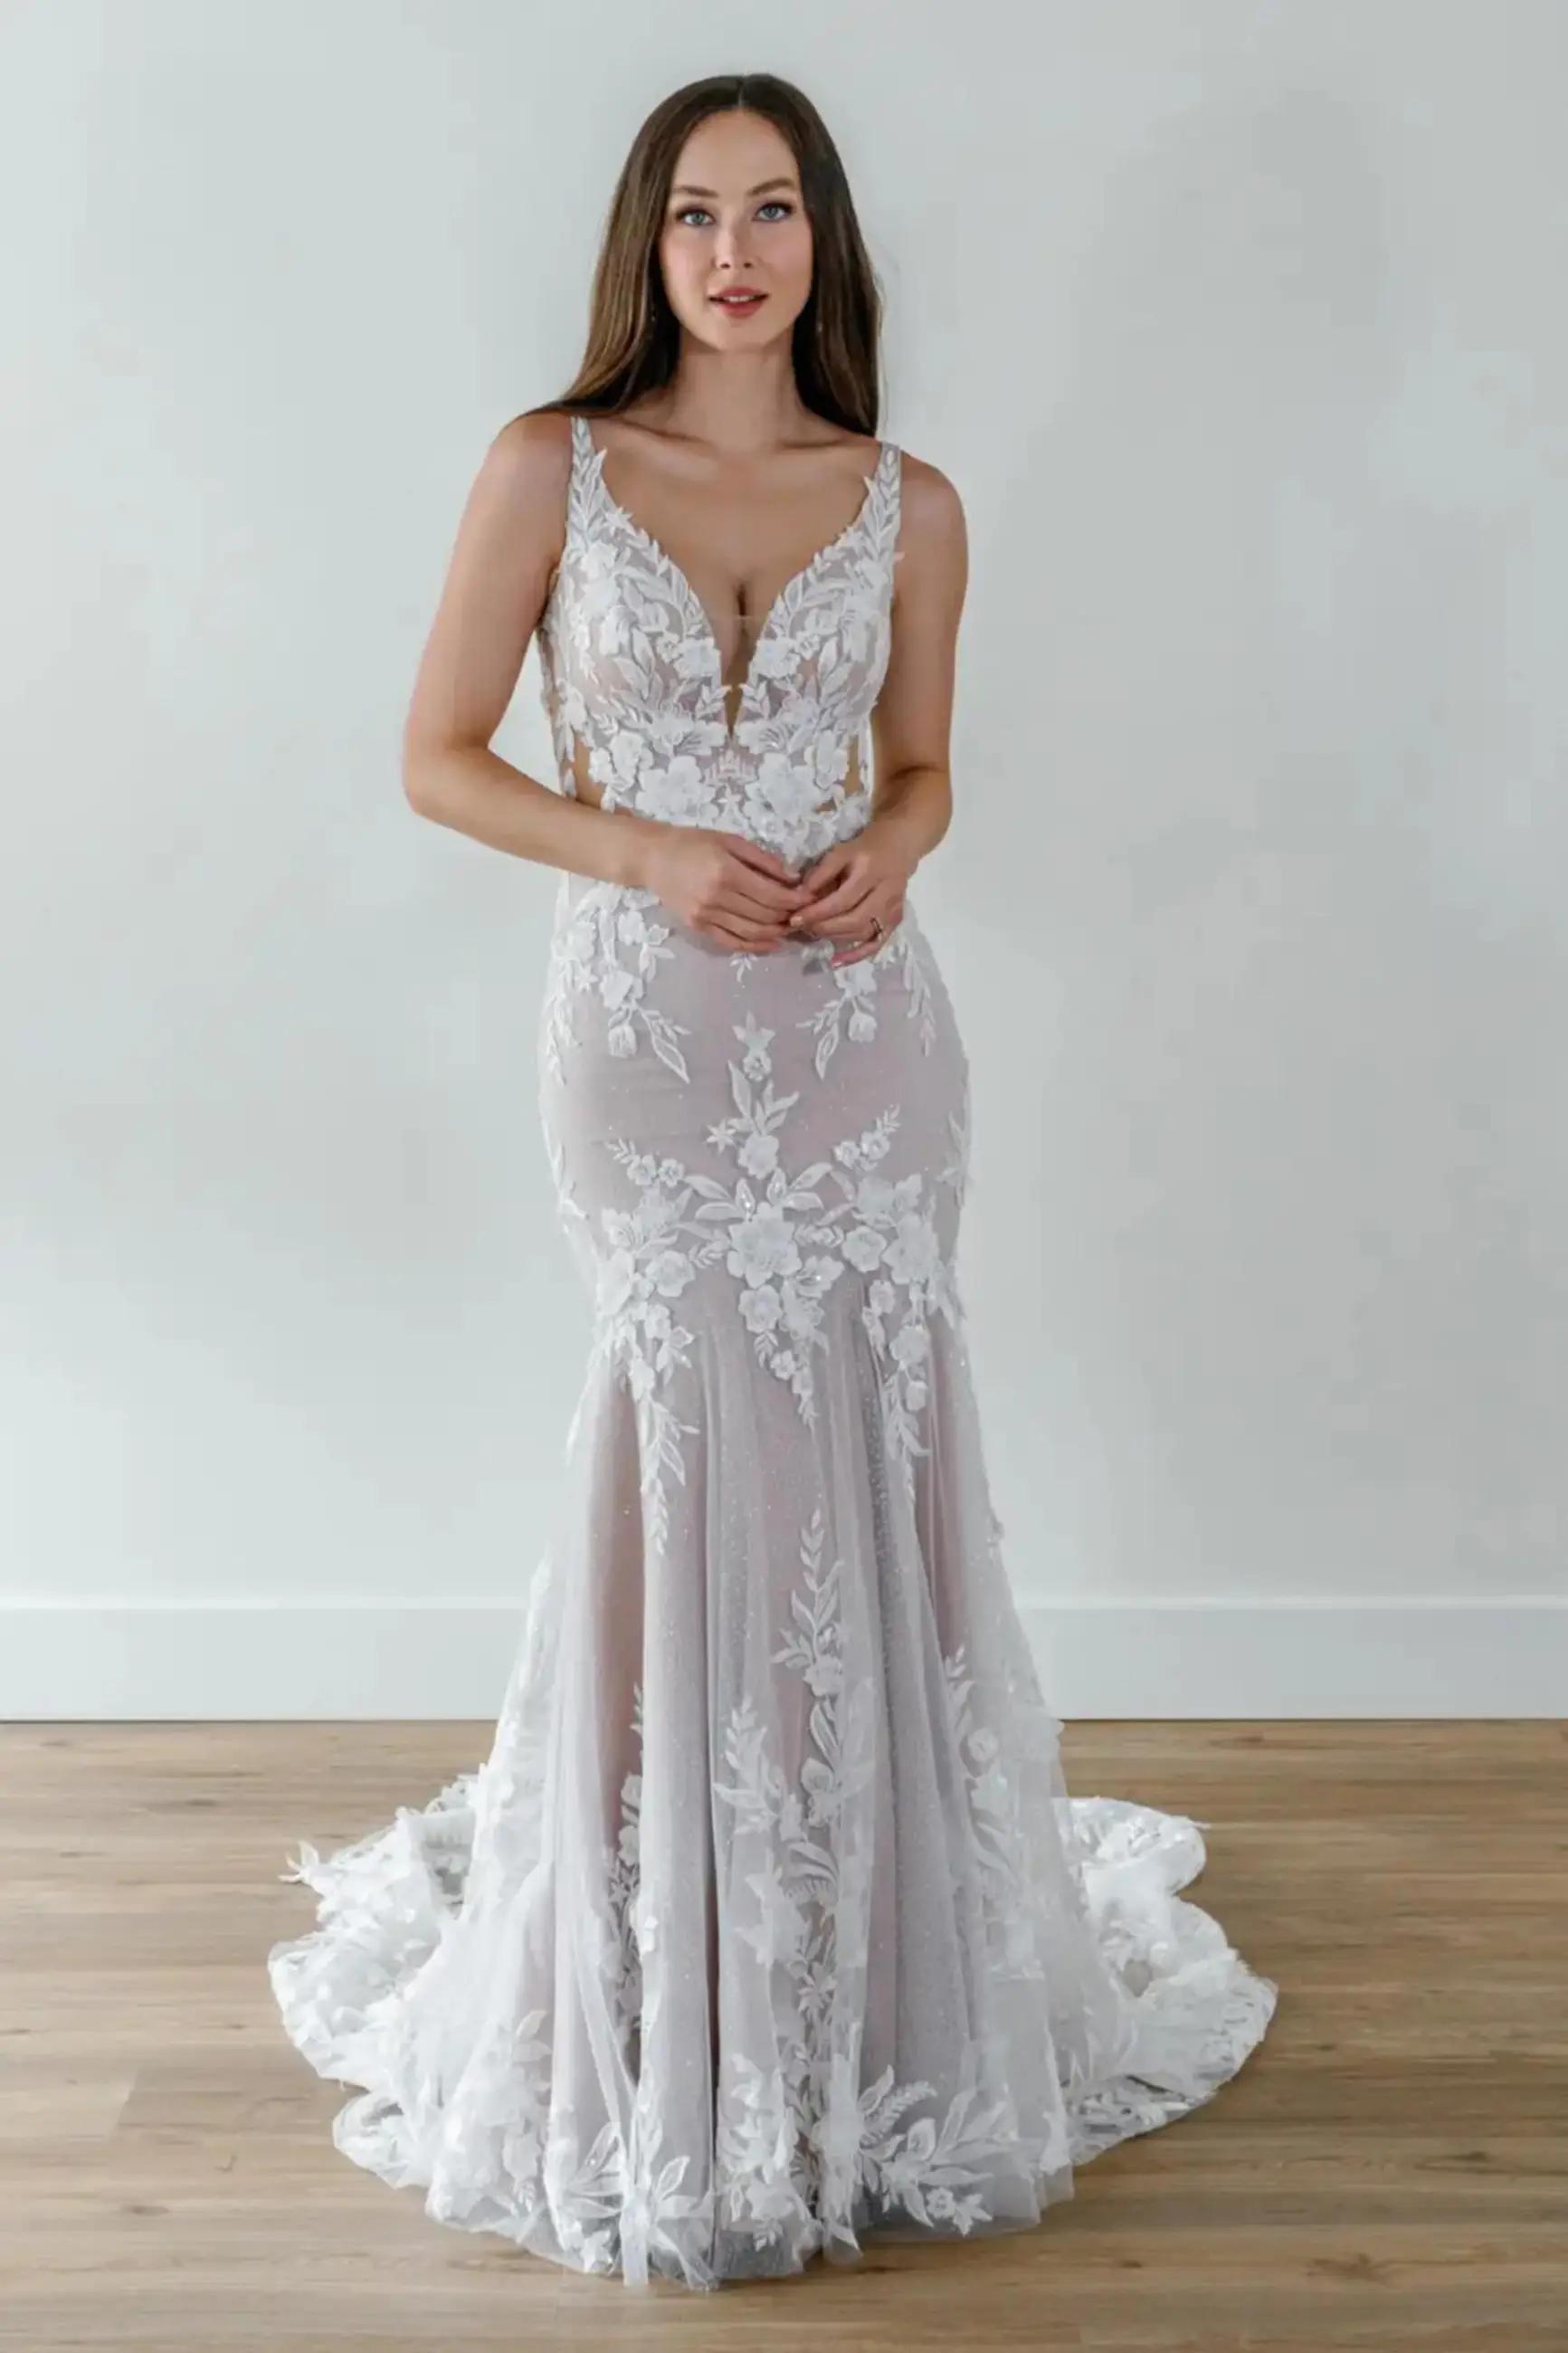 Discovering the Unique Styles of Modeca and Wtoo Bridal Gowns Image